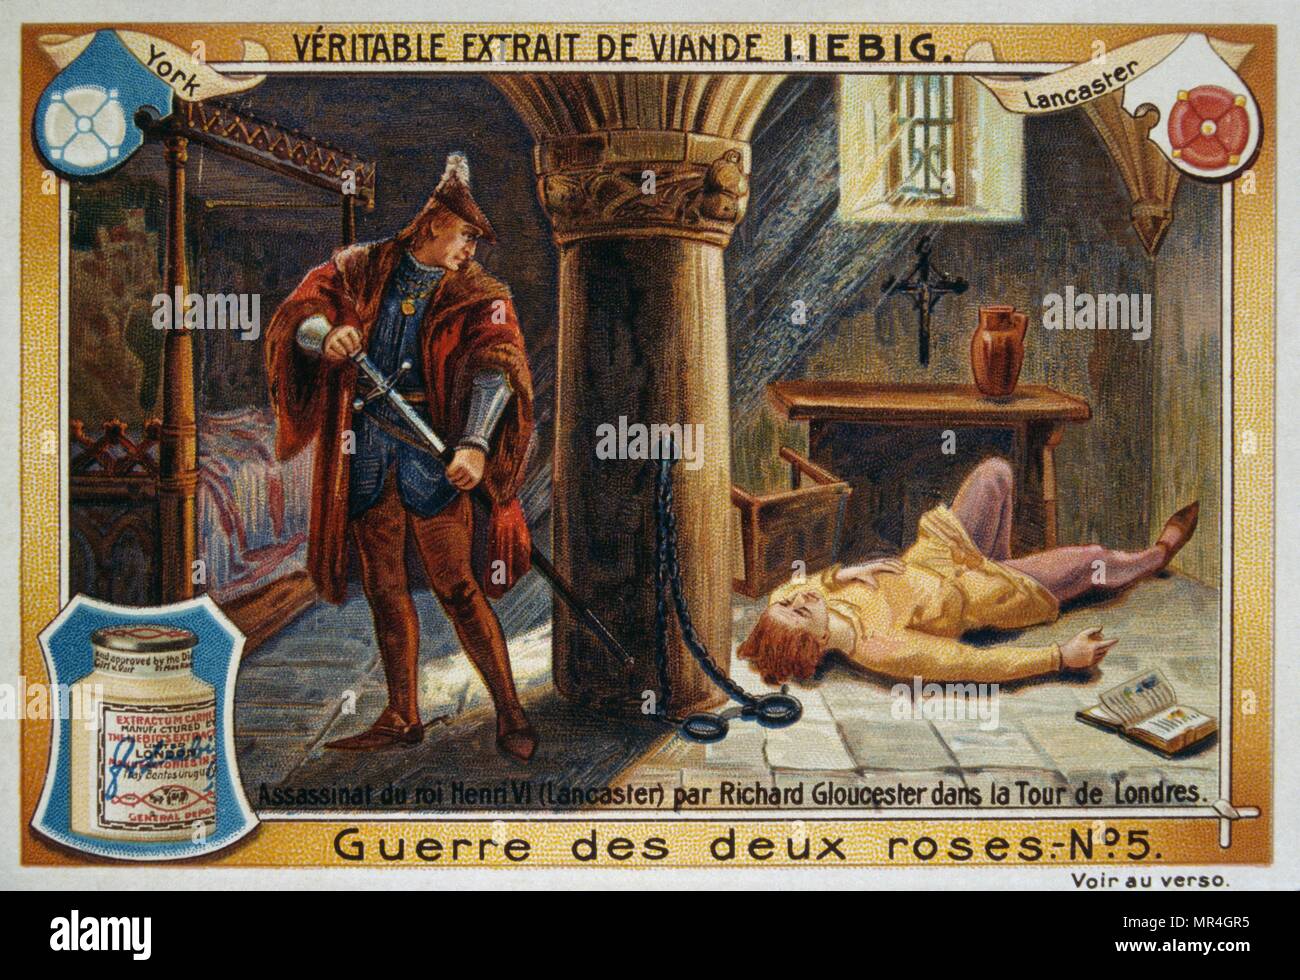 War of the Roses: Leibig card, 1900, depicting the murder in the Tower of London, of Henry VI (1471), King of England from 1422 to 1461 and again from 1470 to 1471, and disputed King of France from 1422 to 1453. Stock Photo